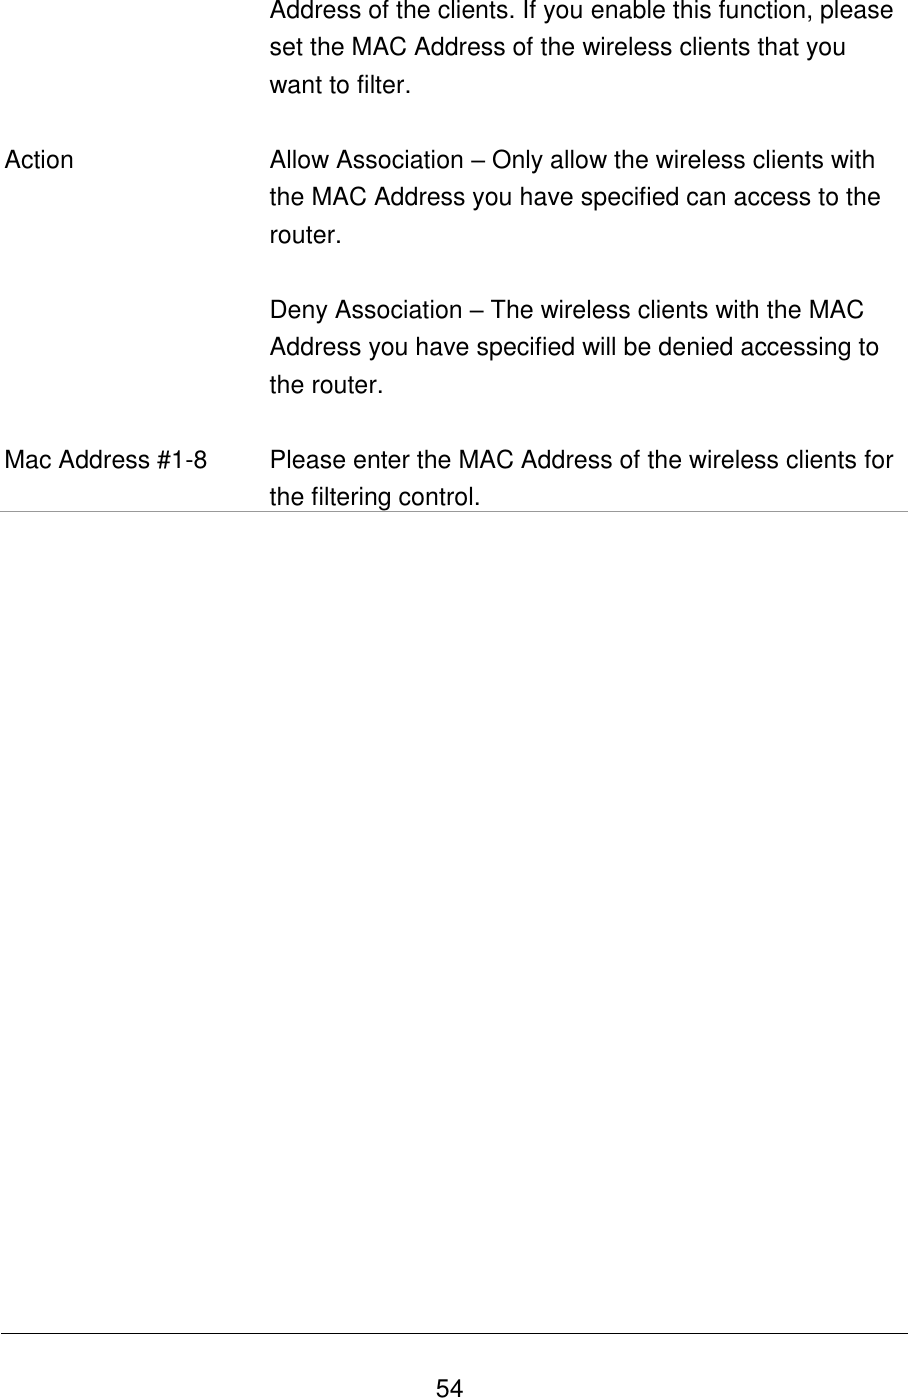   54 Address of the clients. If you enable this function, please set the MAC Address of the wireless clients that you want to filter.   Action Allow Association – Only allow the wireless clients with the MAC Address you have specified can access to the router.  Deny Association – The wireless clients with the MAC Address you have specified will be denied accessing to the router.  Mac Address #1-8 Please enter the MAC Address of the wireless clients for the filtering control.                     